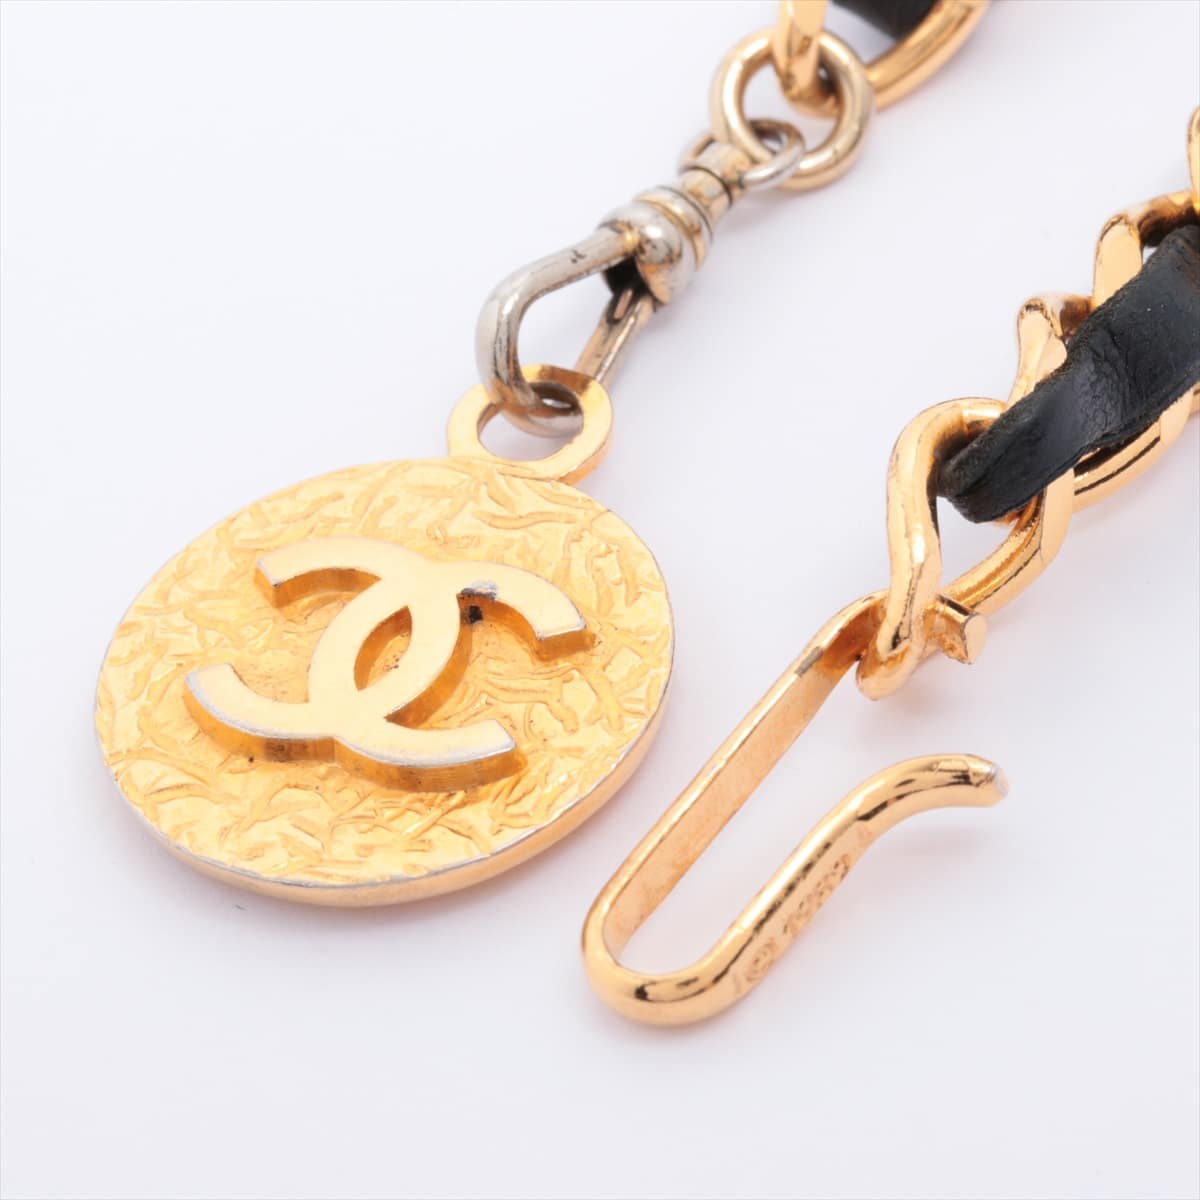 Chanel Coco Mark Chain belt GP & leather Gold